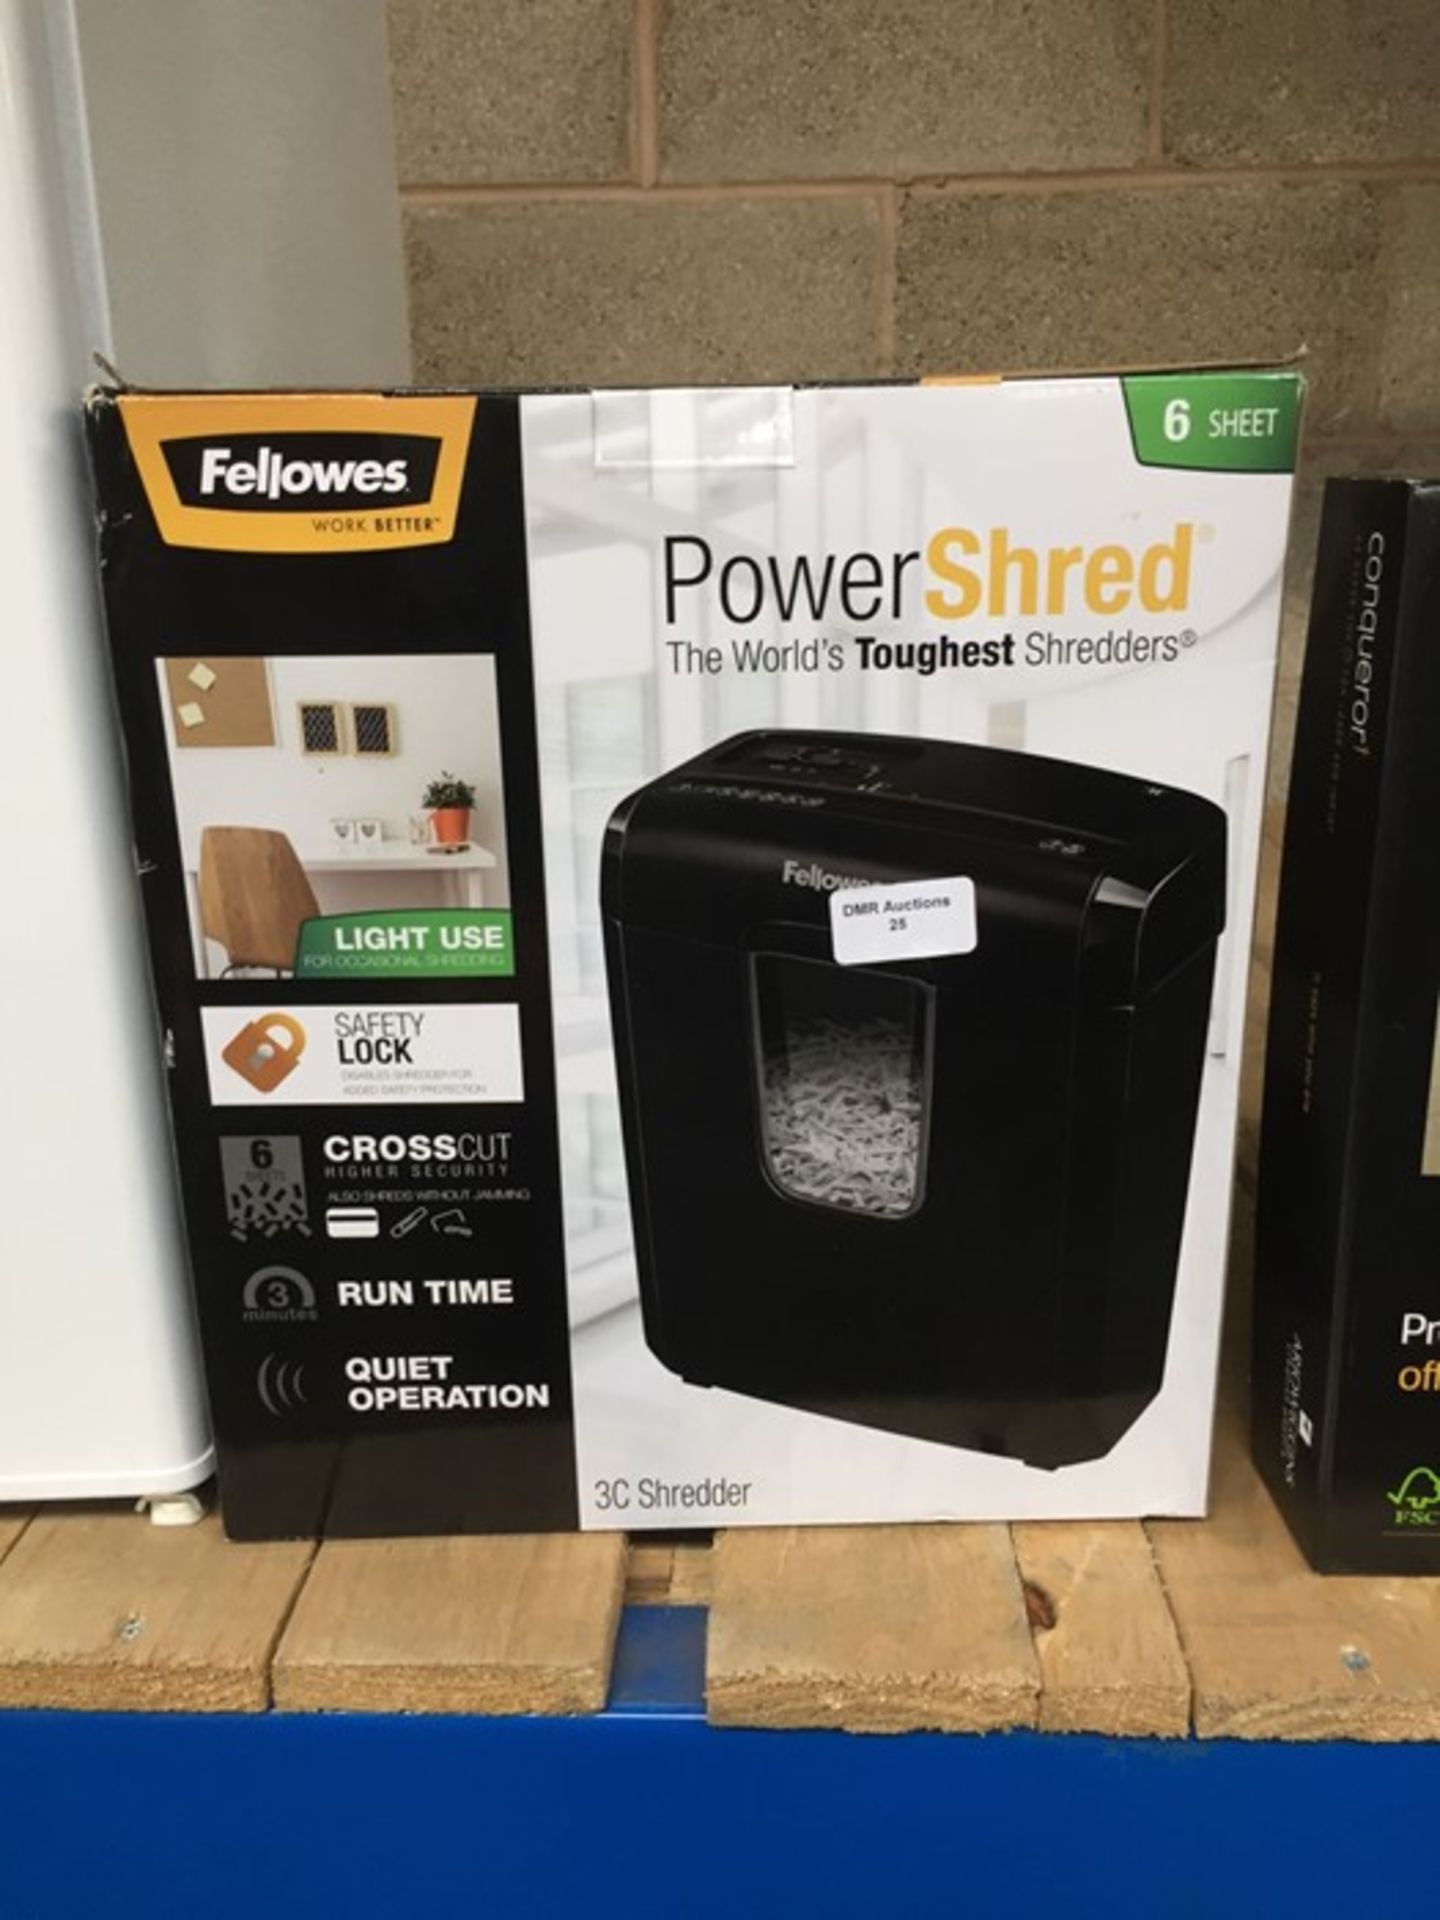 1 LOT TO CONTAIN 1 X FELLOWES 6 SHEET A4 POWERSHRED PAPER SHREDDER - BOXED